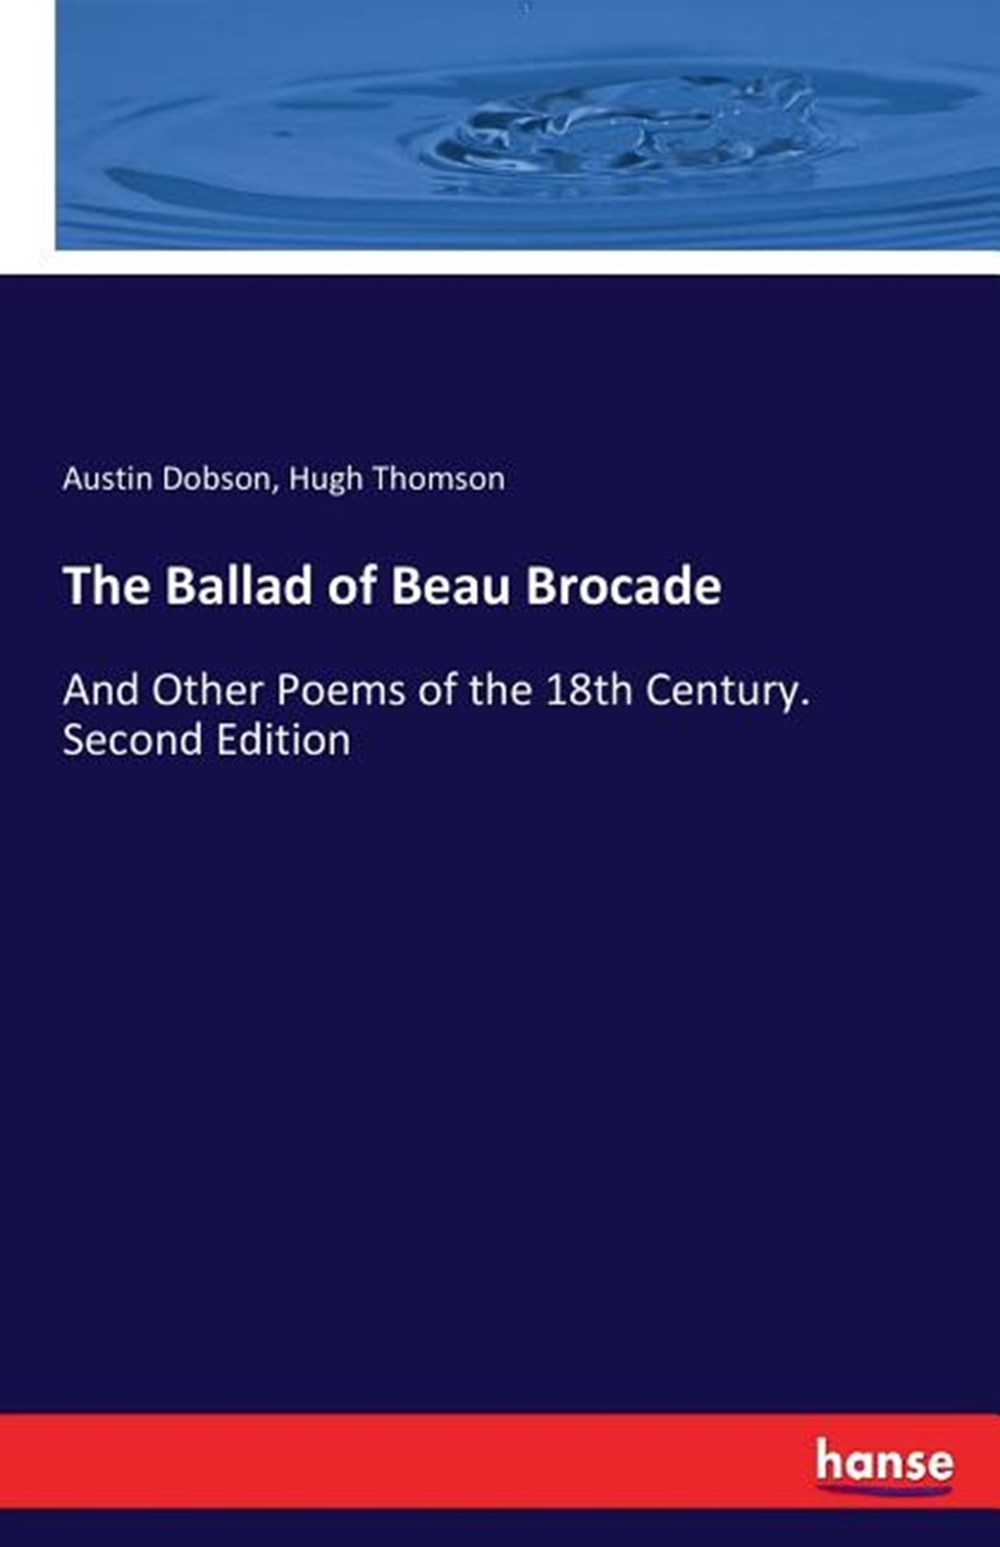 Ballad of Beau Brocade: And Other Poems of the 18th Century. Second Edition